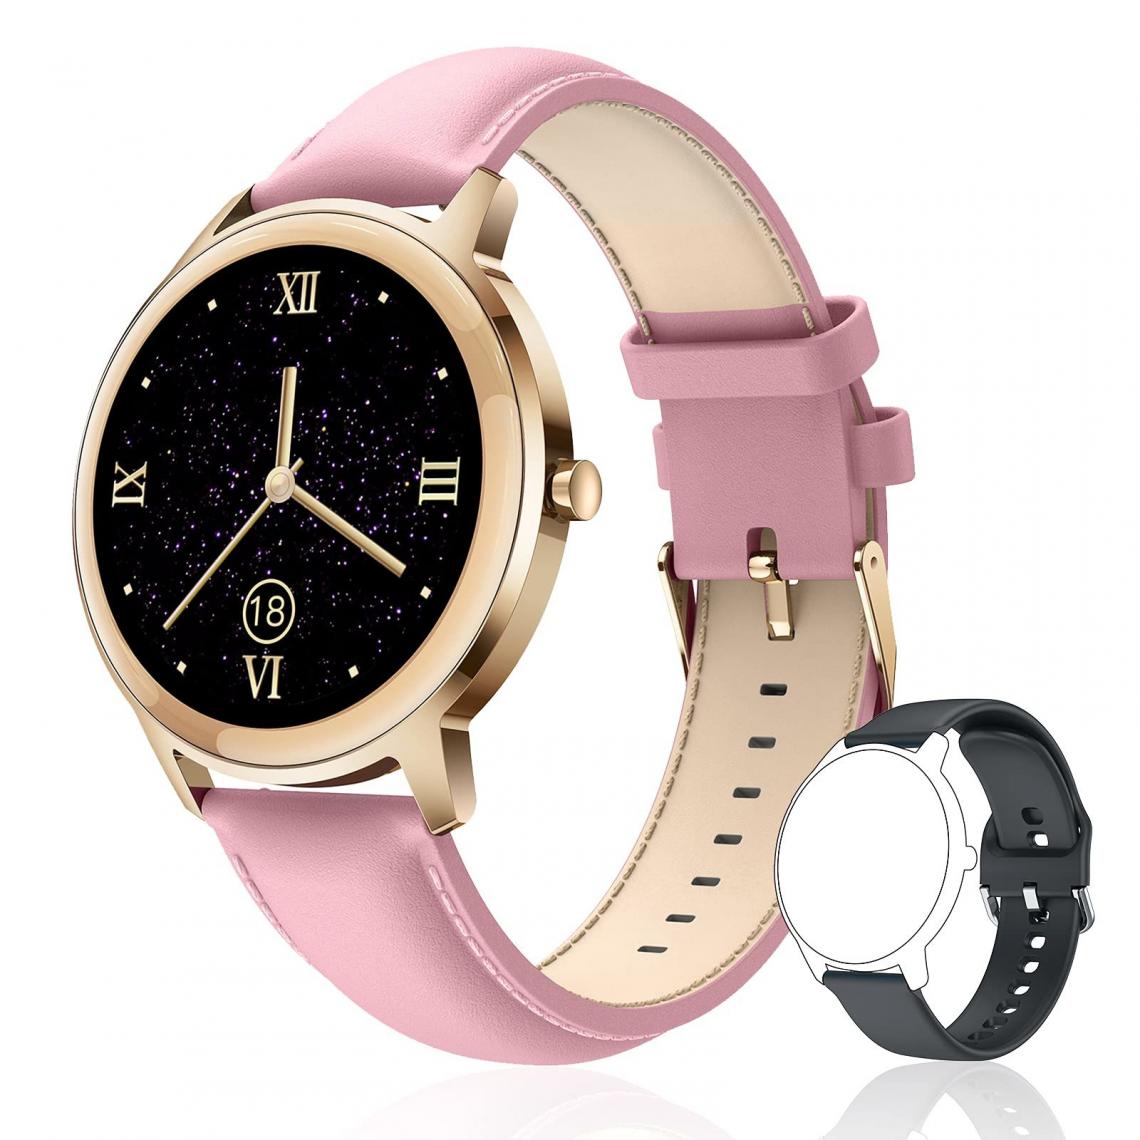 Chronotech Montres - Chronus Smart Watch for Women - Fitness Watch Sports Tracker with Heart Rate Sleep Monitoring Blood Pressure Measurement Message Reminder Pedometer IP67 Waterproof Smart Watches for Android & IOS(Rose) - Montre connectée